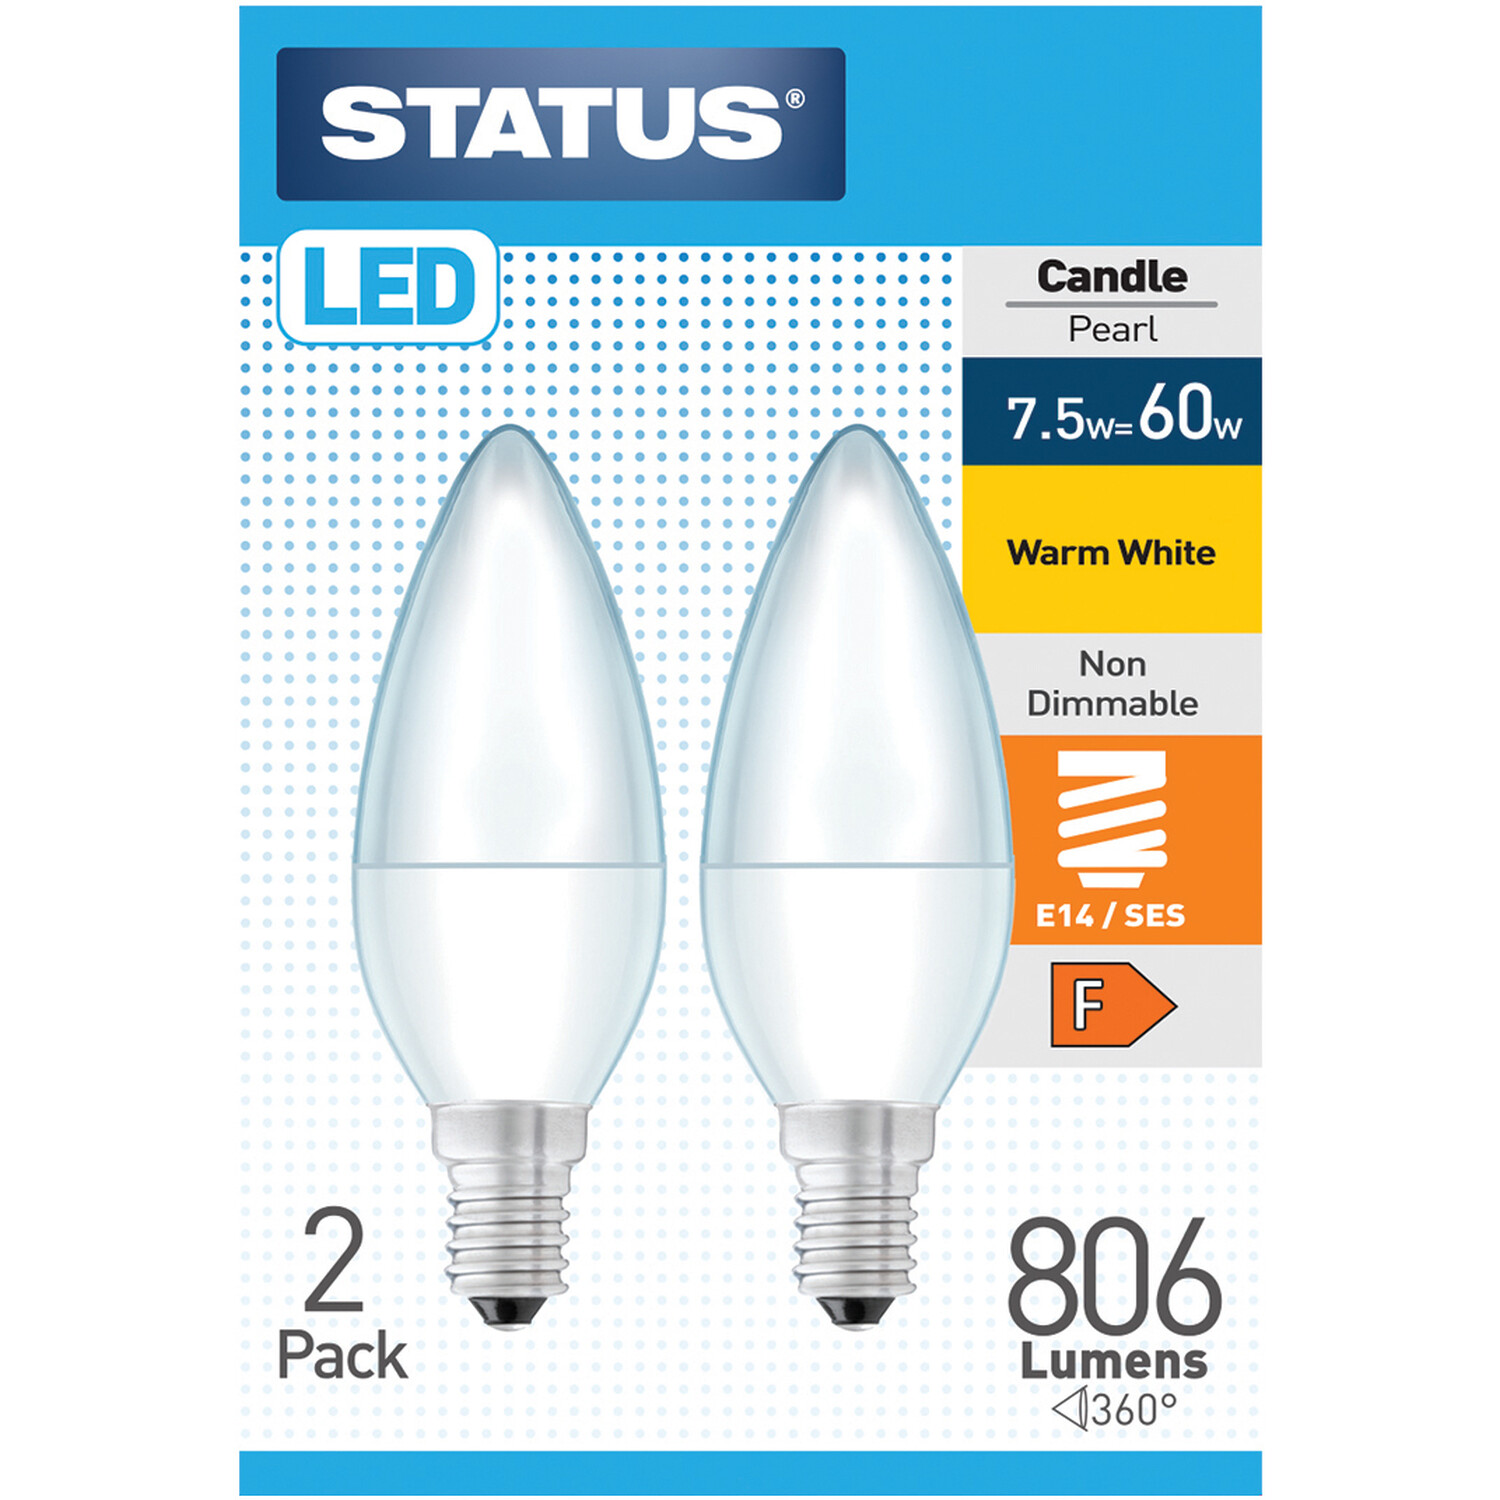 Pack of 2 Status LED 7.5W SES Pearl Candle Lightbulbs Image 1